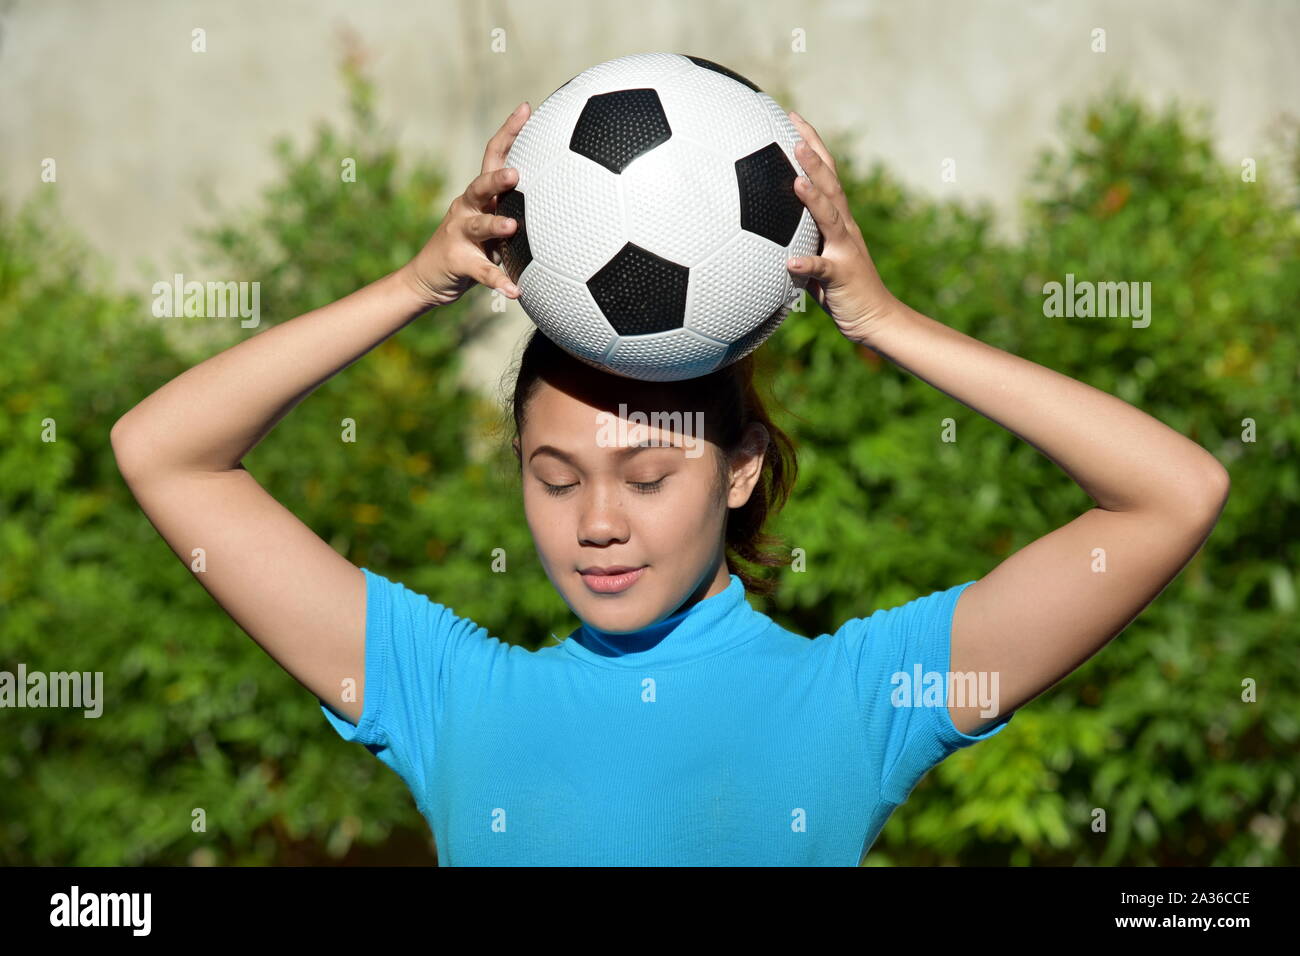 A Beautiful Soccer Player With Soccer Ball Stock Photo